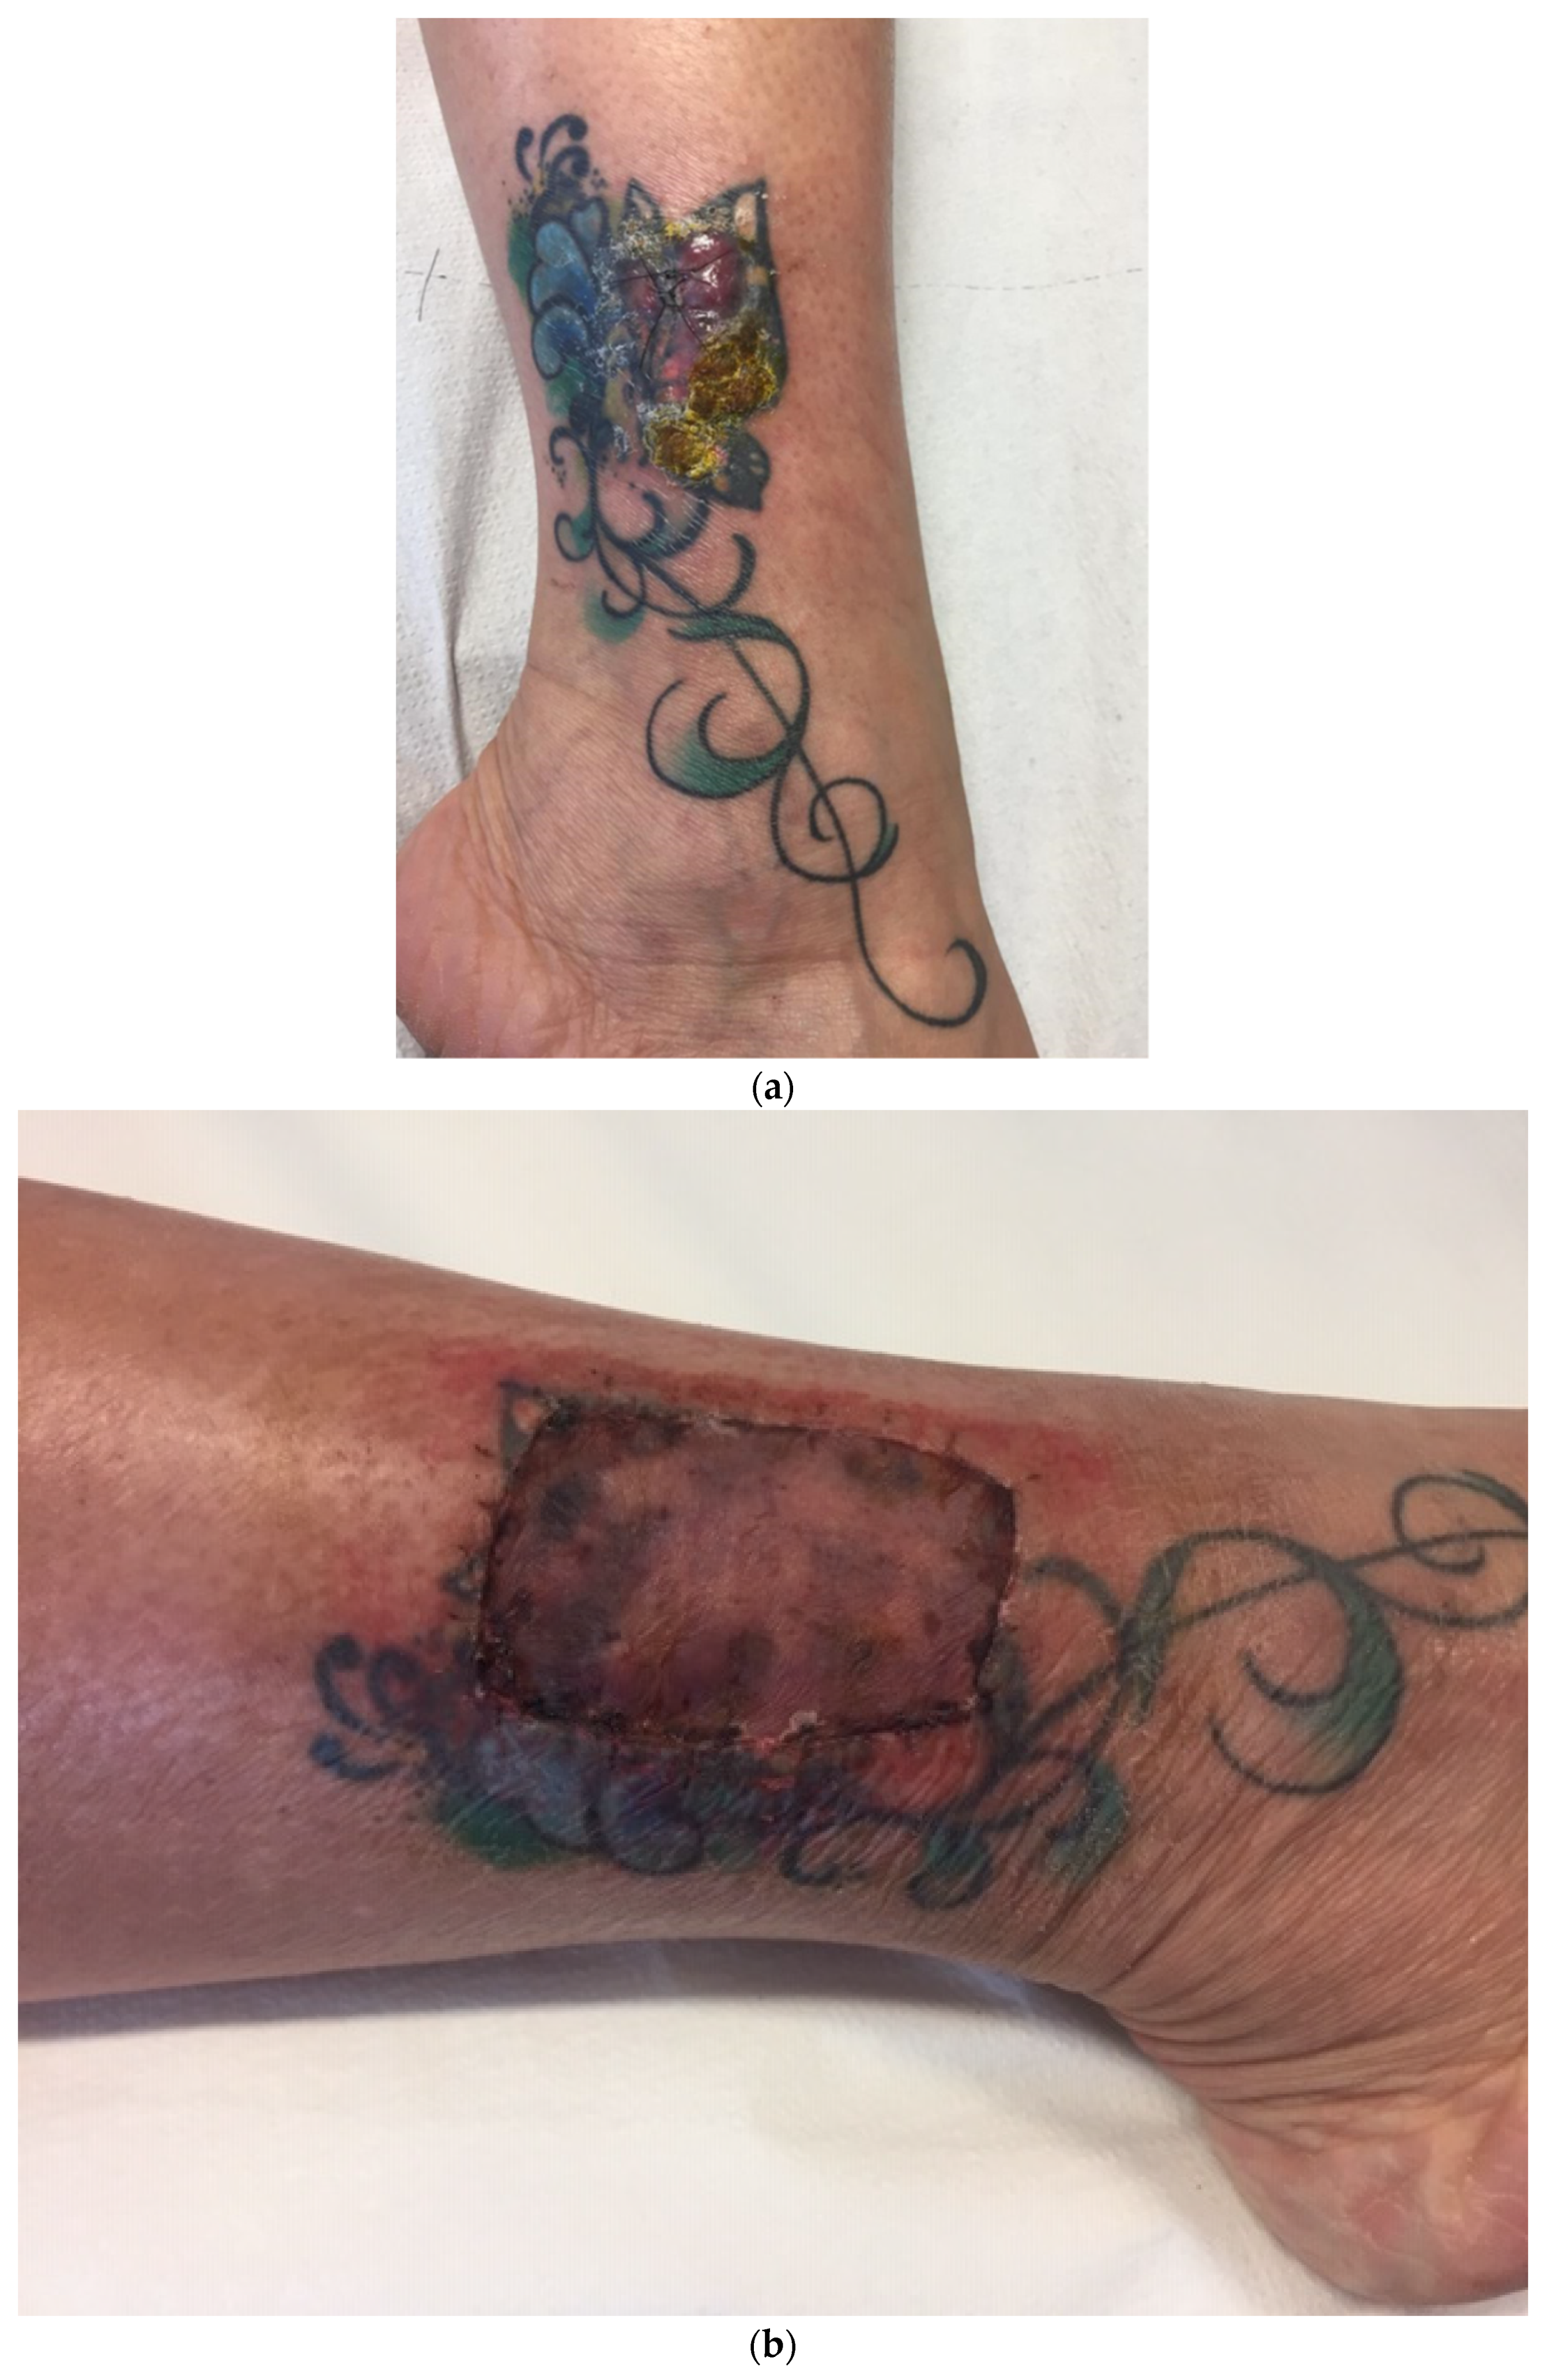 Tattoos 7 unexpected skin reactions and what to do about them